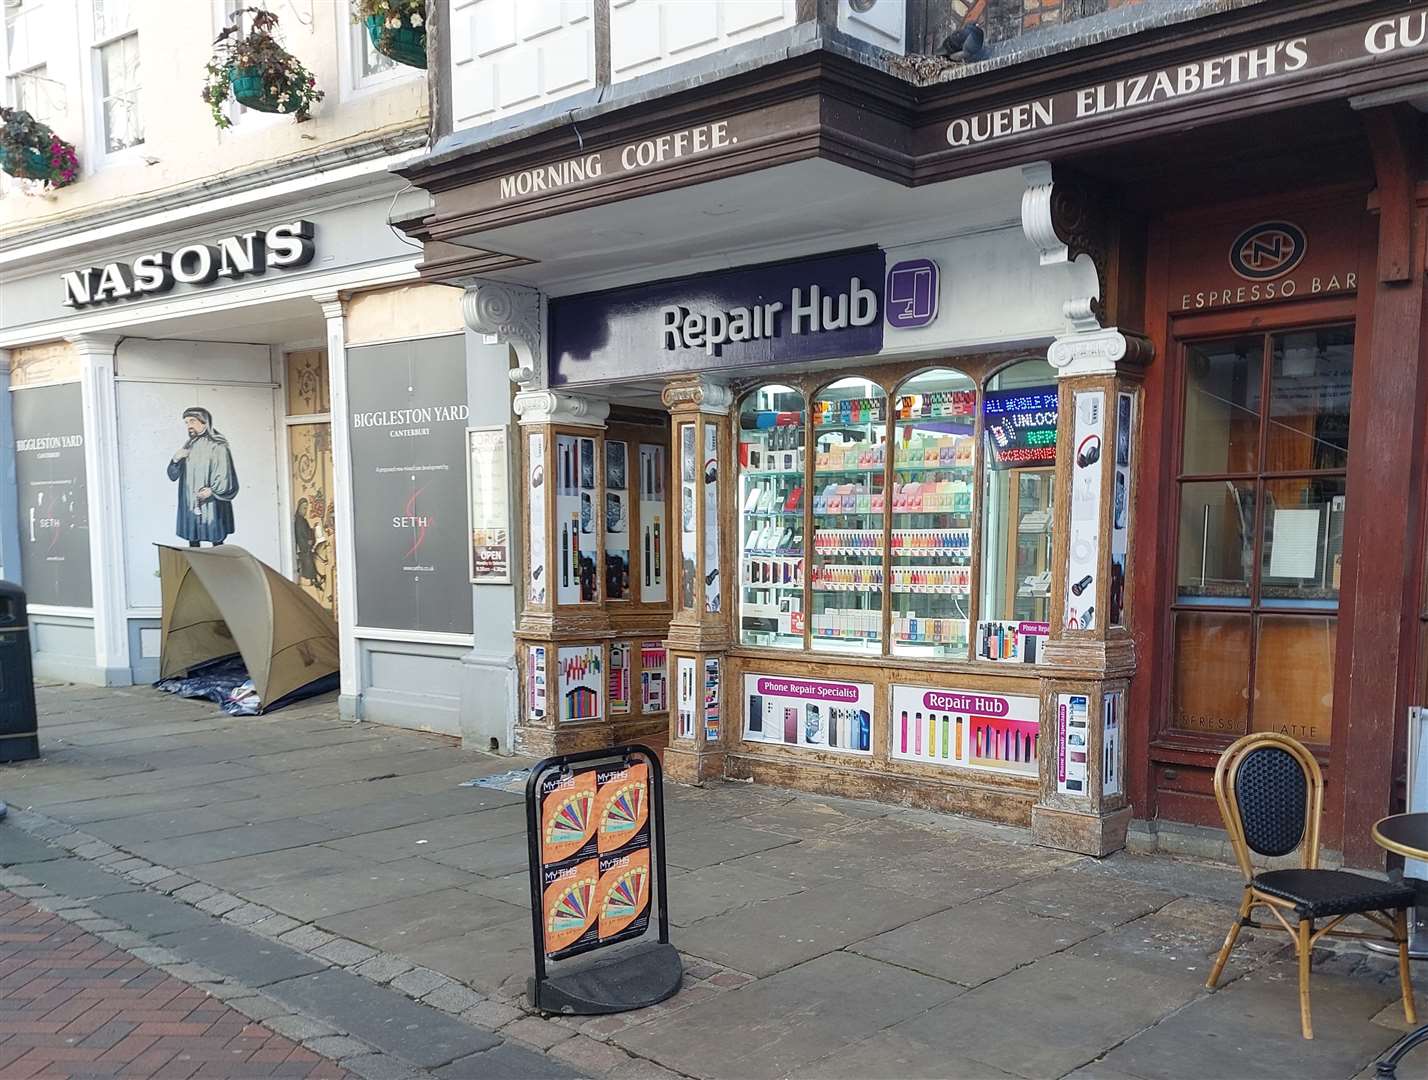 Our reporter bought a grape soda-flavoured Geek Bar Pro device offering 1,500 puffs from Repair Hub in High Street, Canterbury